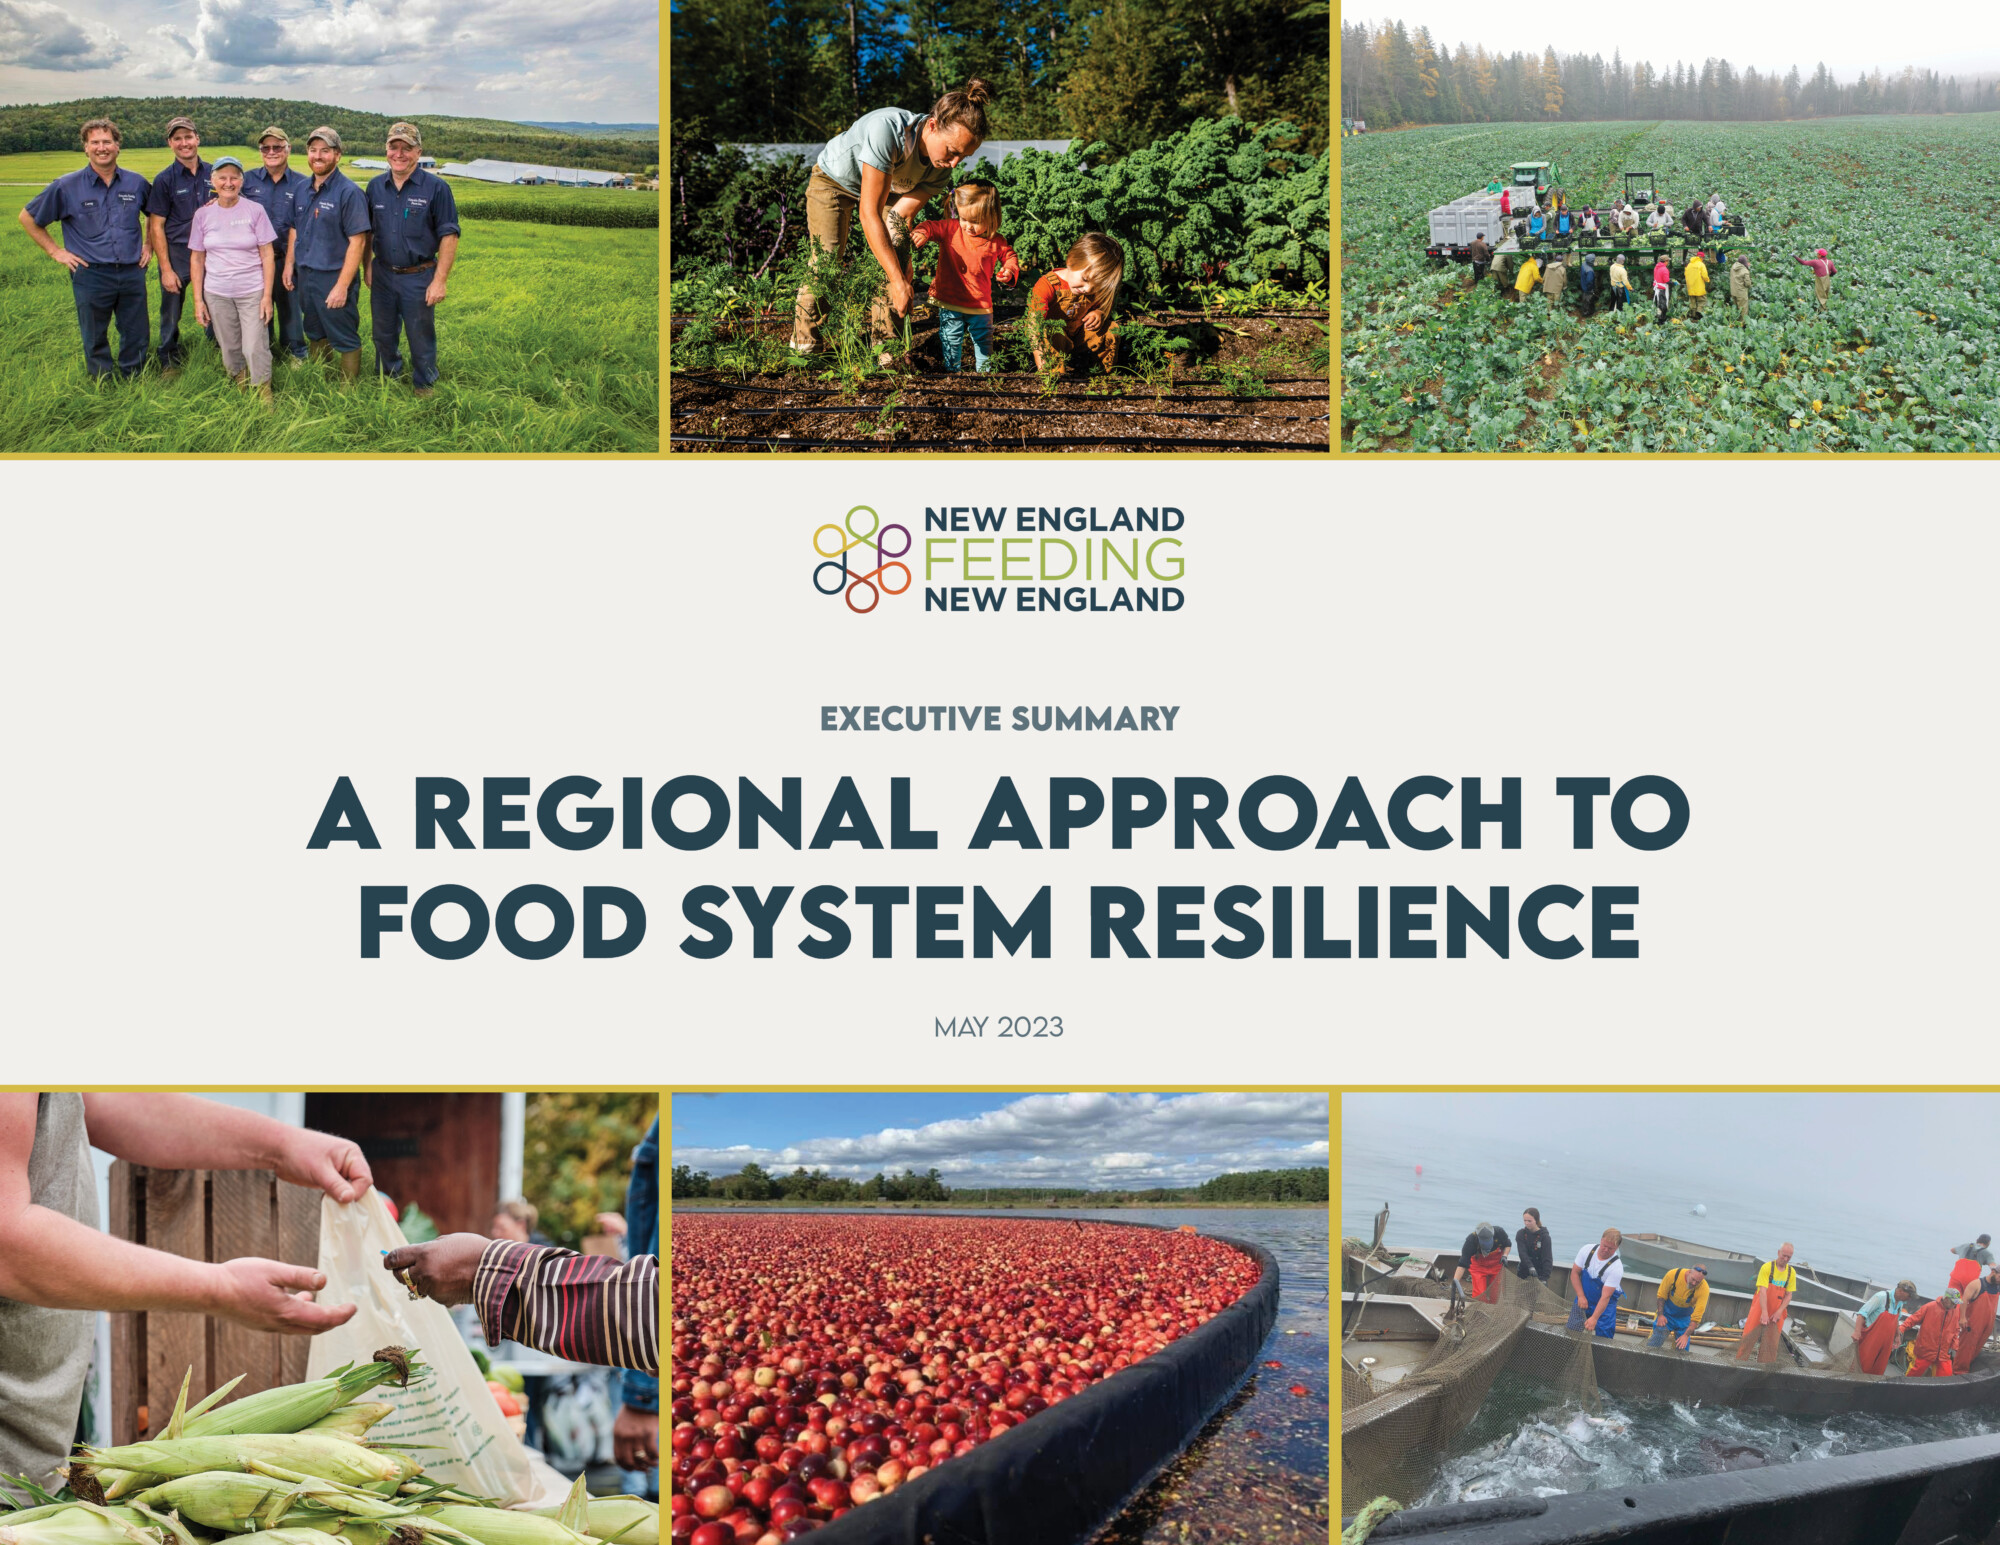 A Regional Approach to Food System Resilience - NEFNE Report